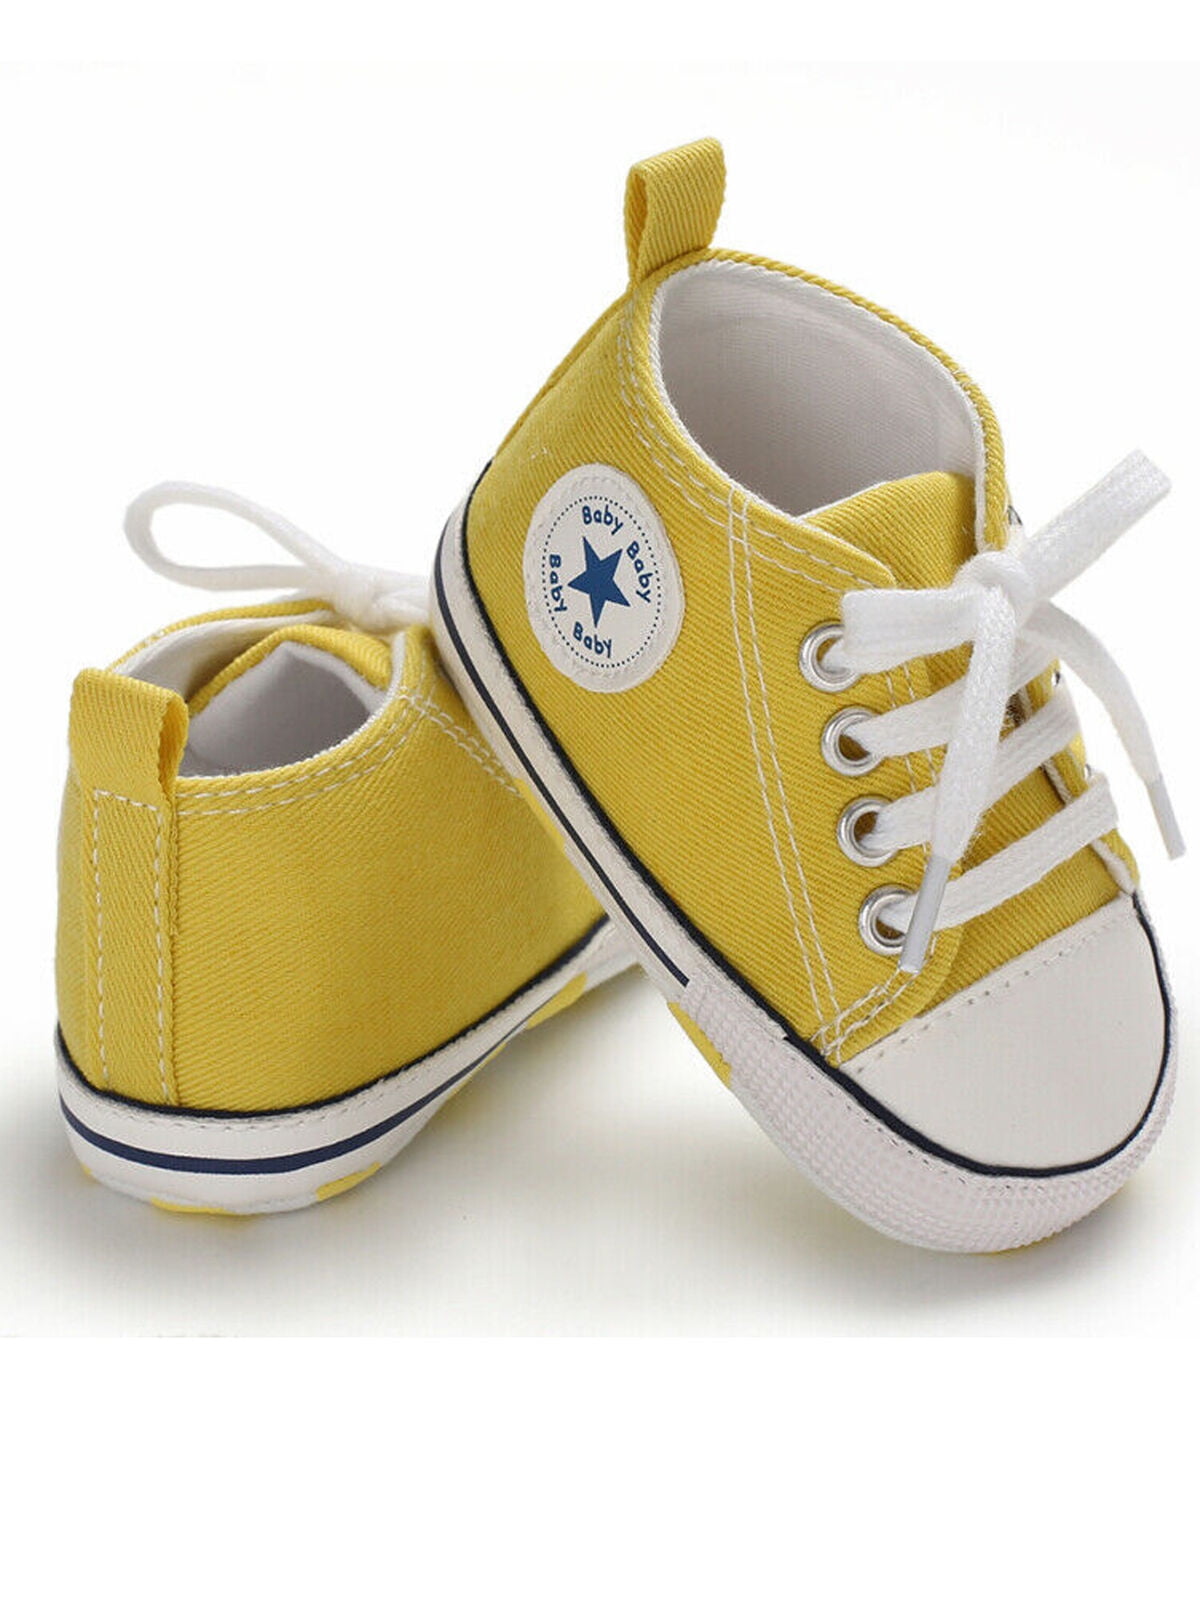 infant first shoes